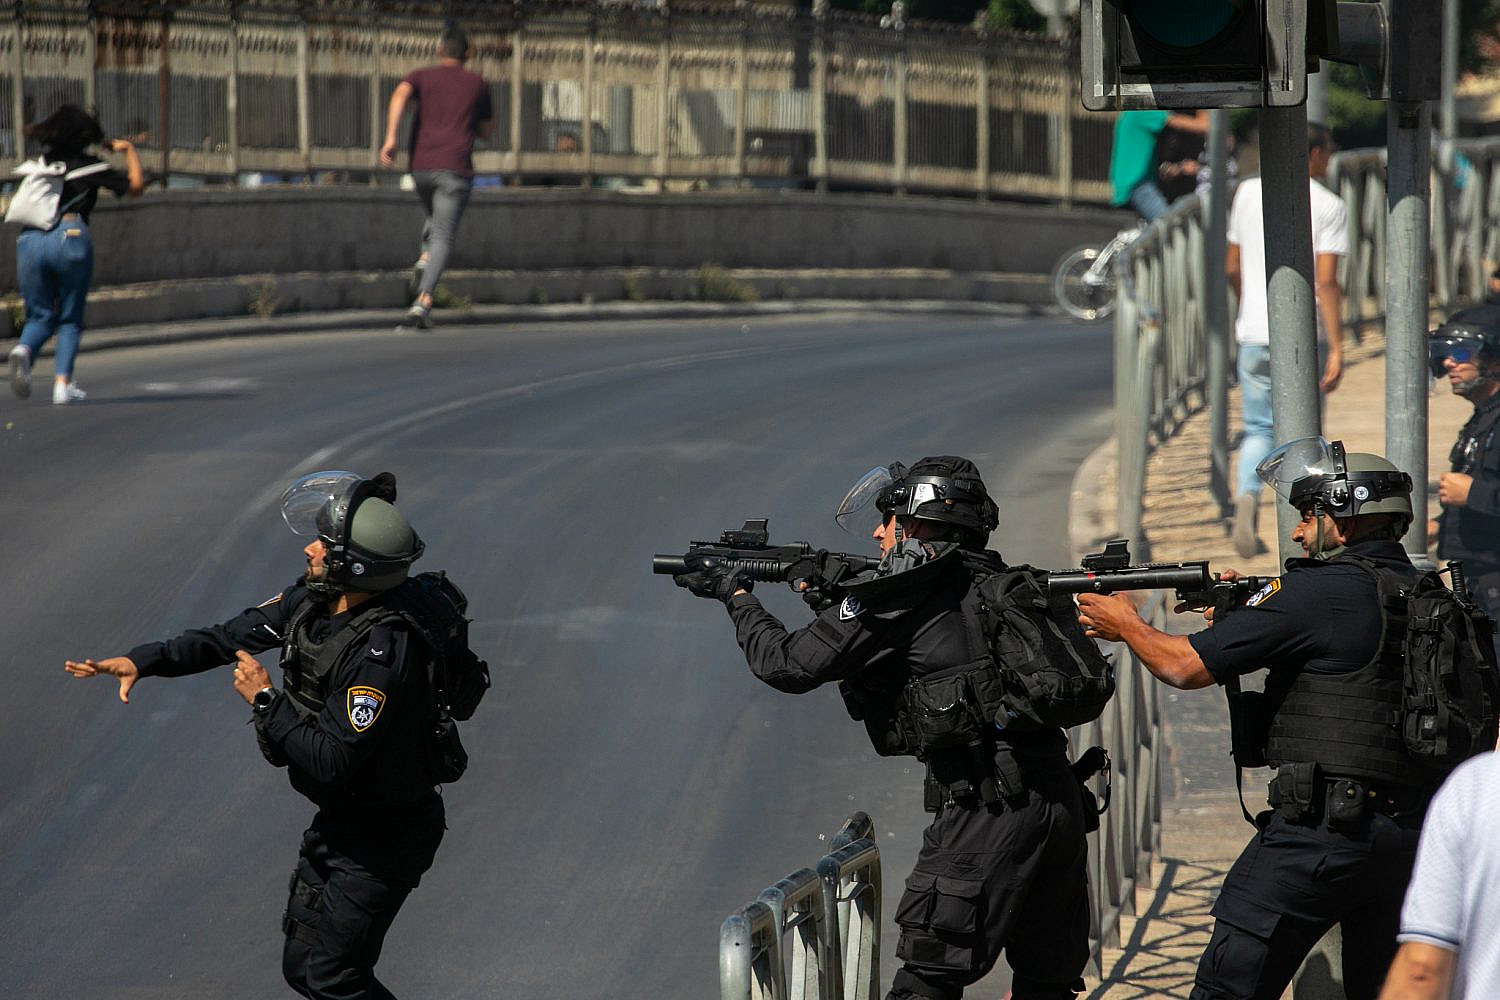 Israeli police officers seen during clashes with protesters at Damascus Gate in Jerusalem's Old City, May 18, 2021. (Olivier Fitoussi/Flash90)